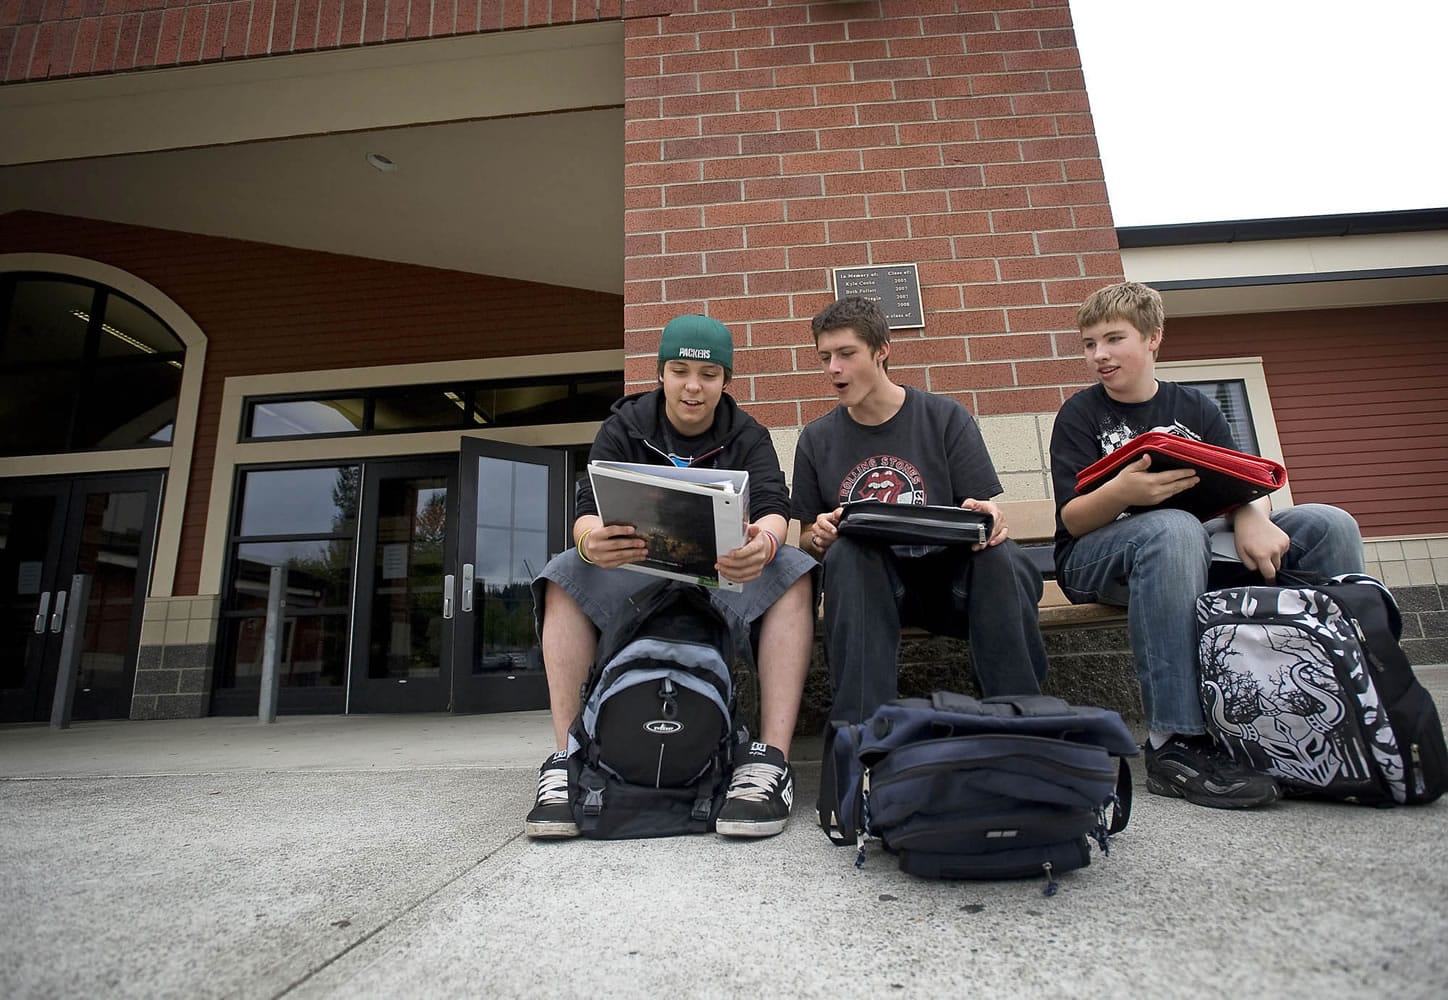 Washougal High School sophomores, from left, Alex McCabe, 15, Hector Morales III, 16, and Austin Milton, 15, compare folders on the first day of school on Tuesday.